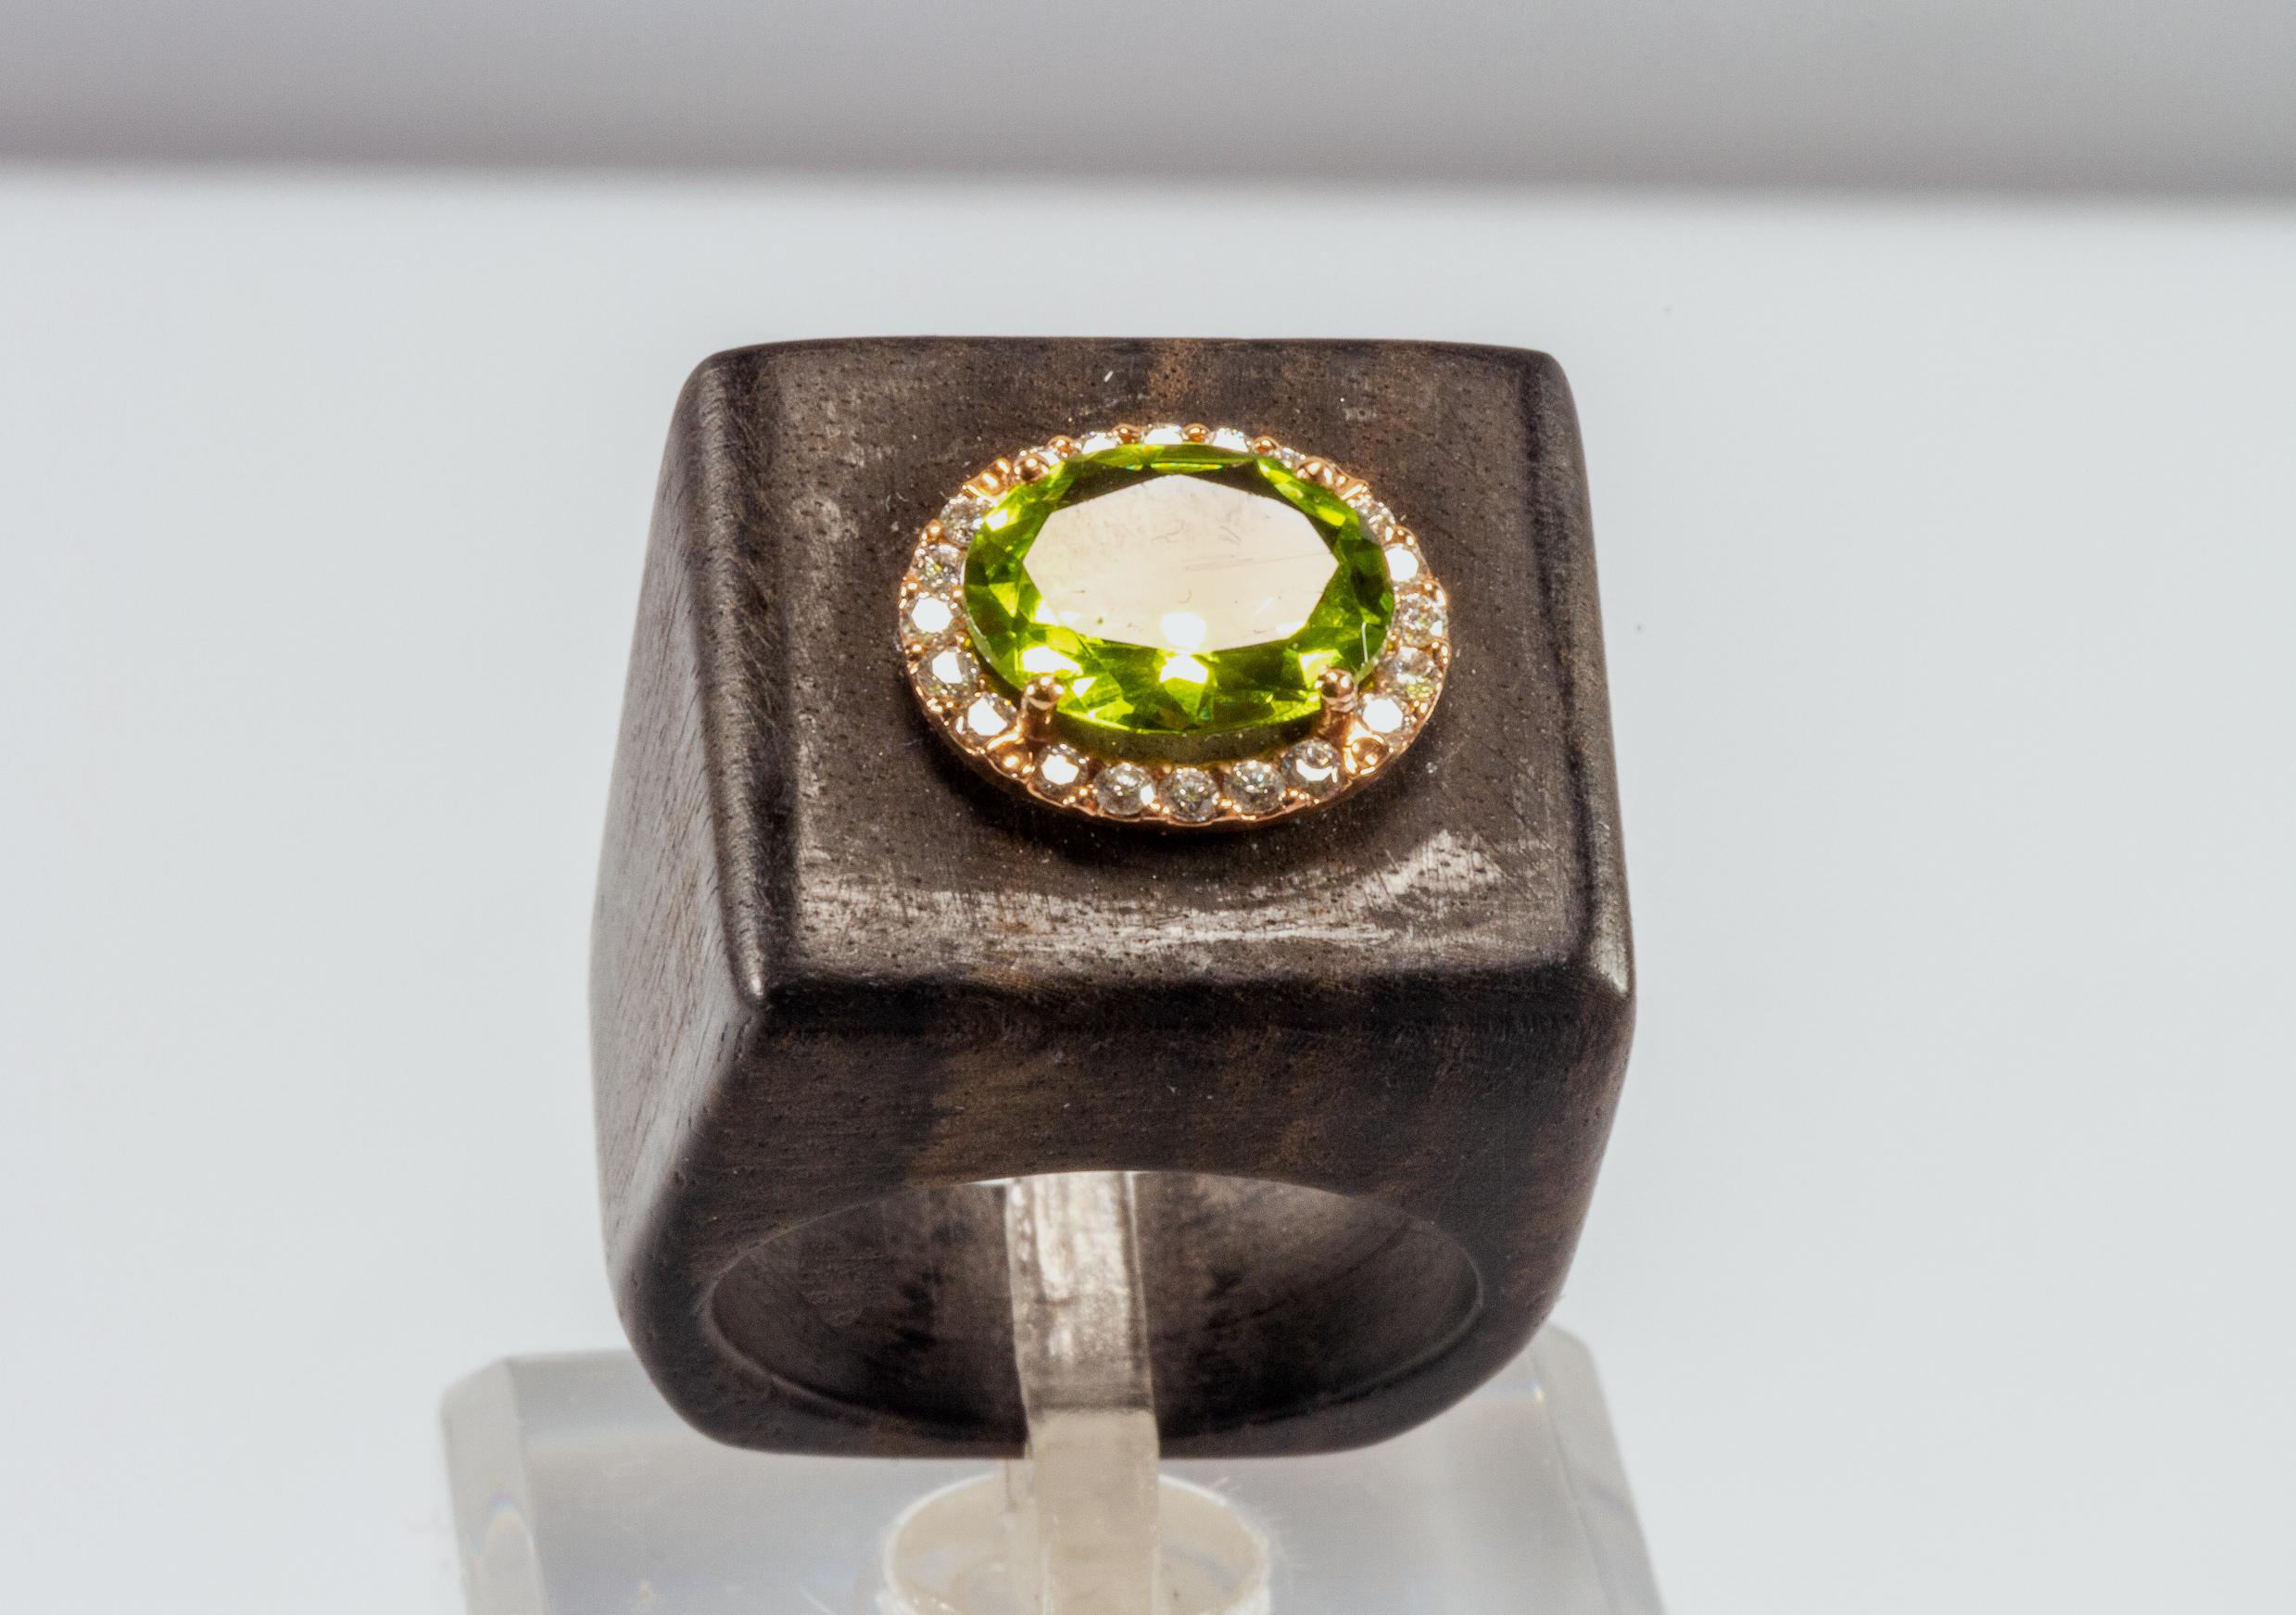 Very original ring in black ebony wood on which a green peridot gem surrounded by diamonds has been set.
The peridot and diamonds are set on a 9 kt rose gold element.
Jewel with a unique design, handmade by Italian artisans with natural